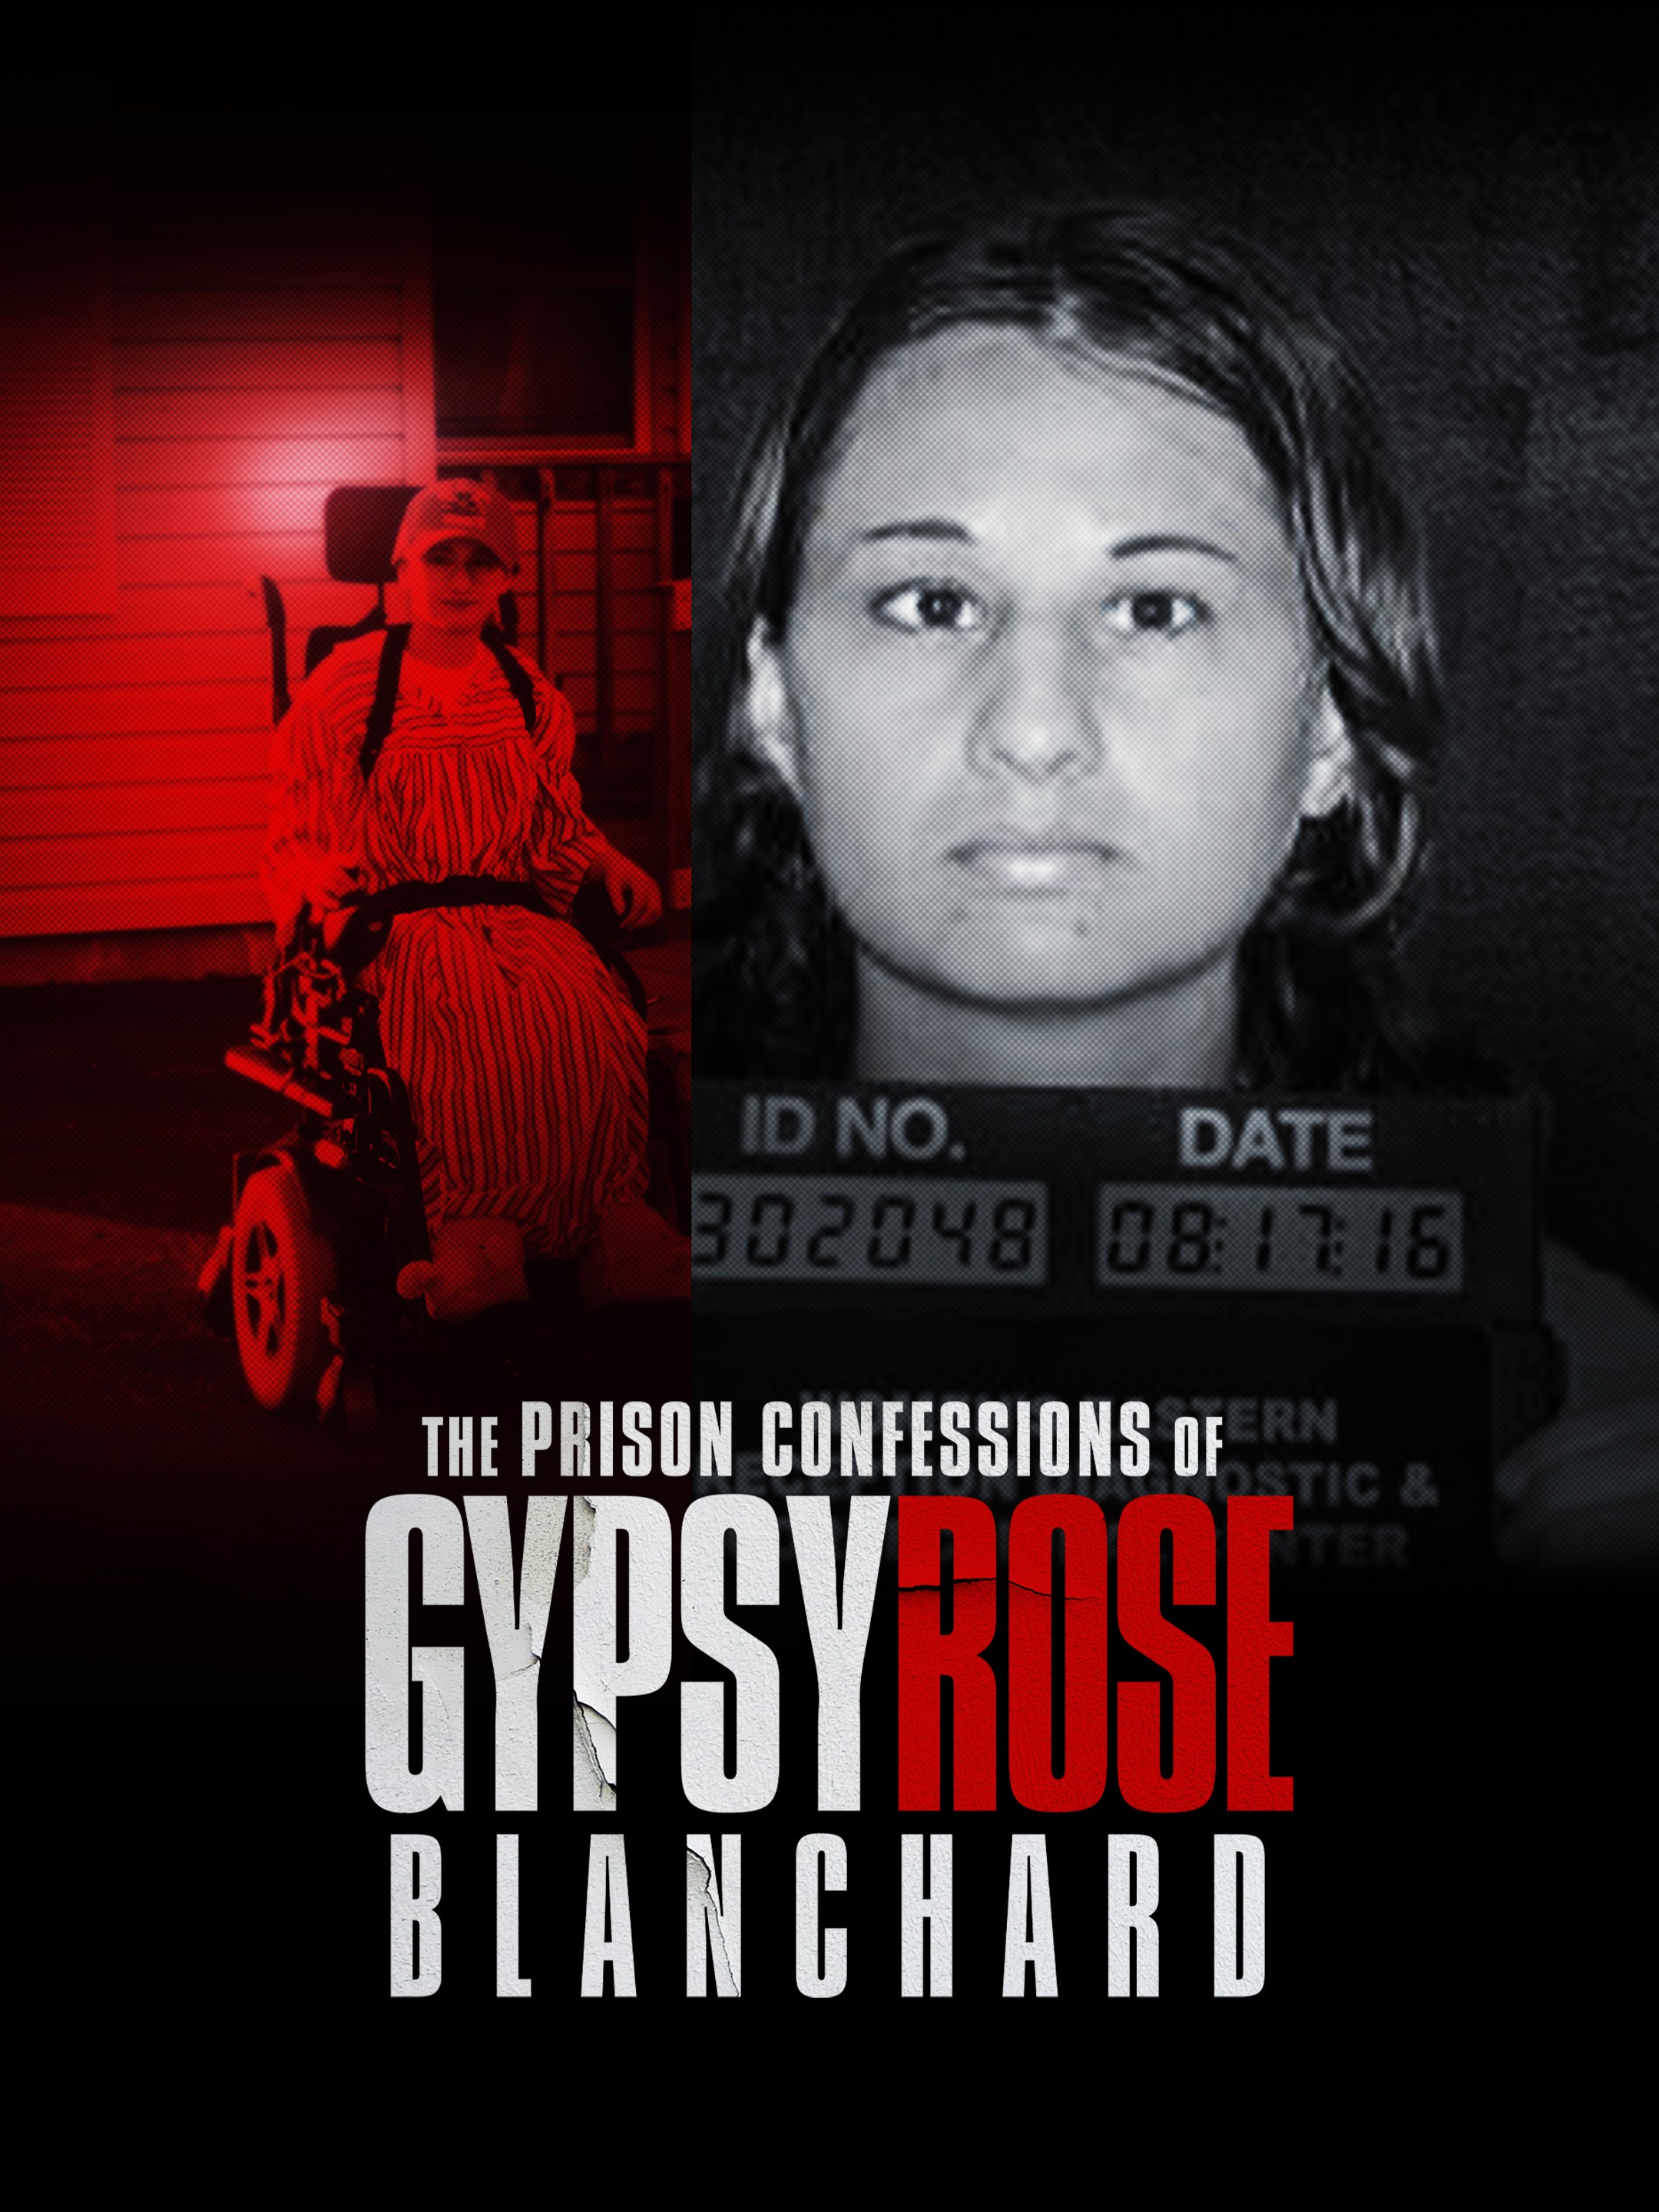 Every Gypsy Rose Blanchard Movie and TV Show You Need To Watch